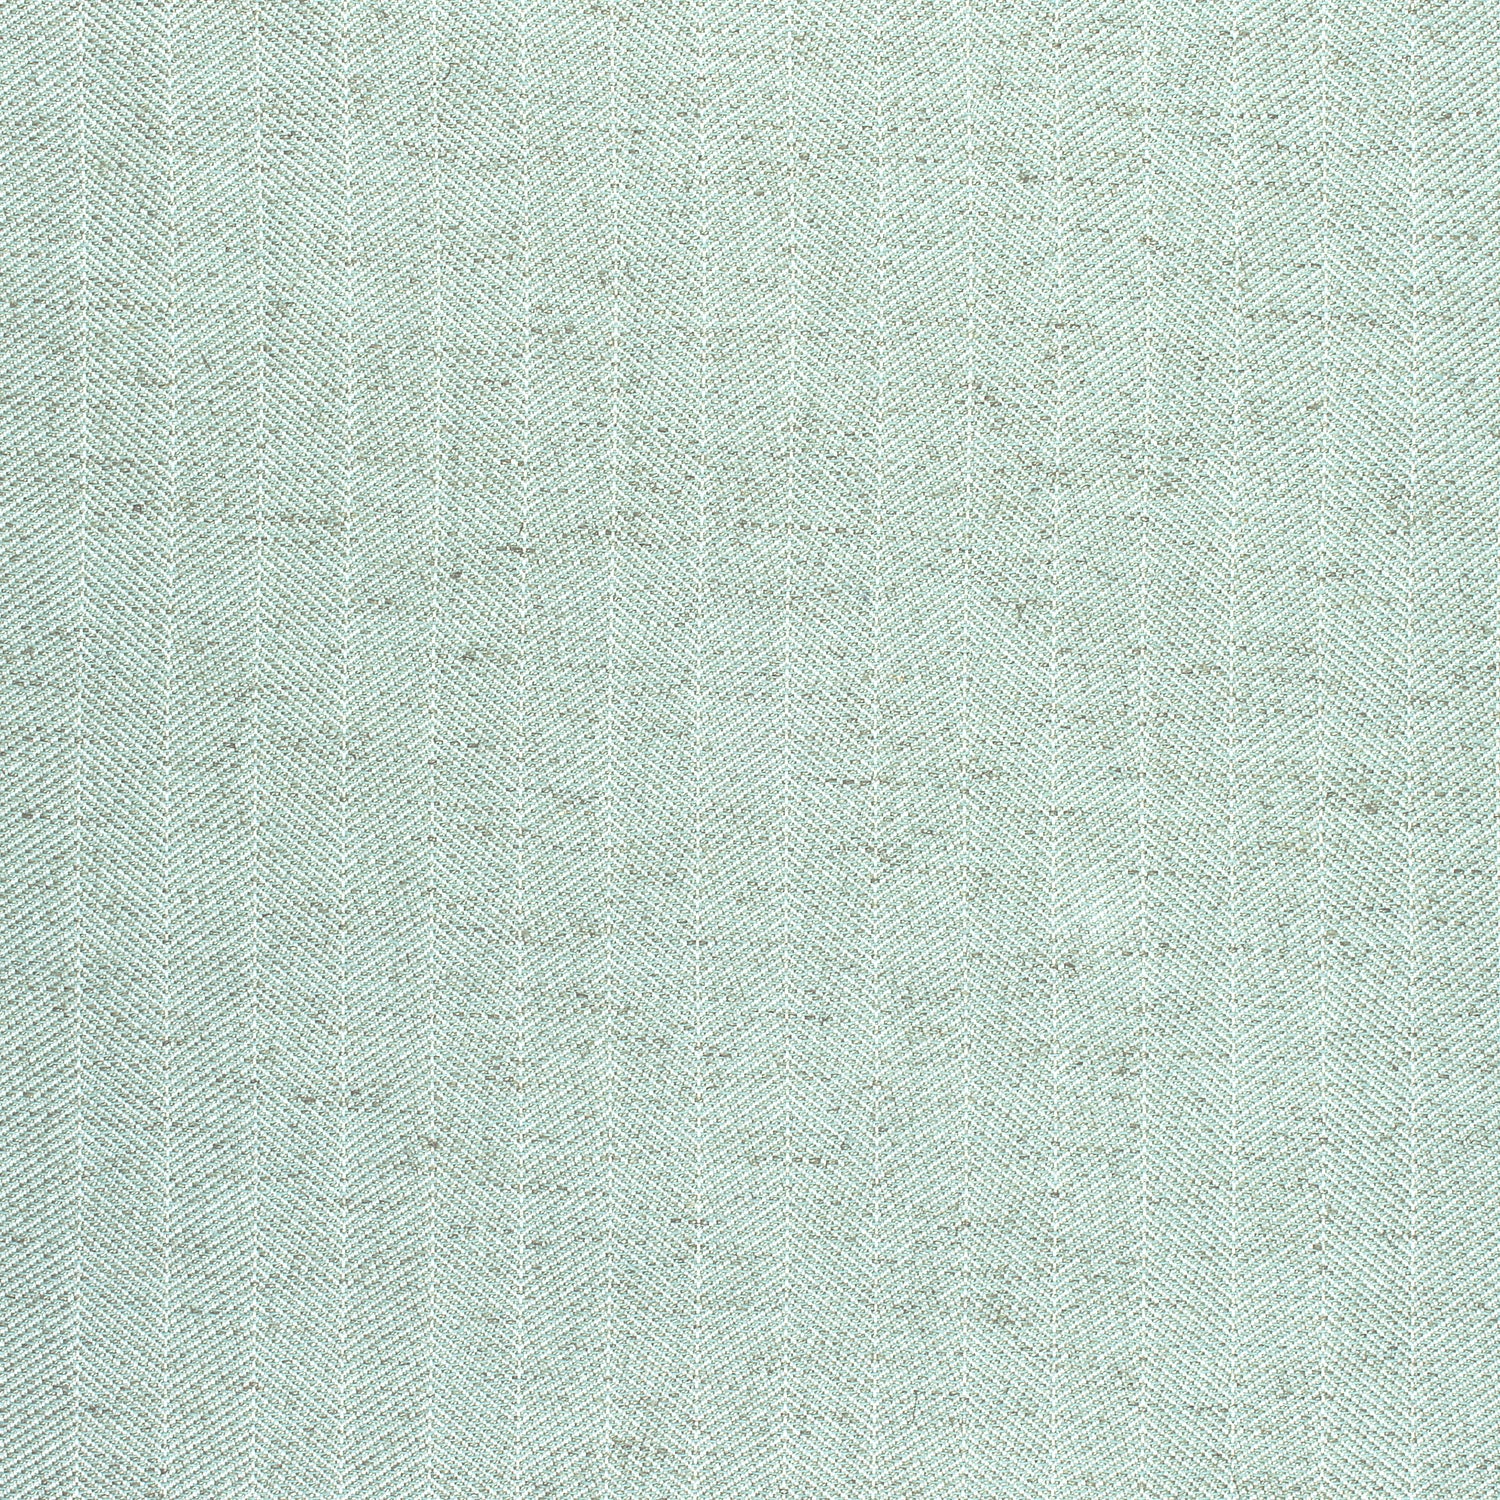 Hamilton Herringbone fabric in celadon color - pattern number W80670 - by Thibaut in the Pinnacle collection